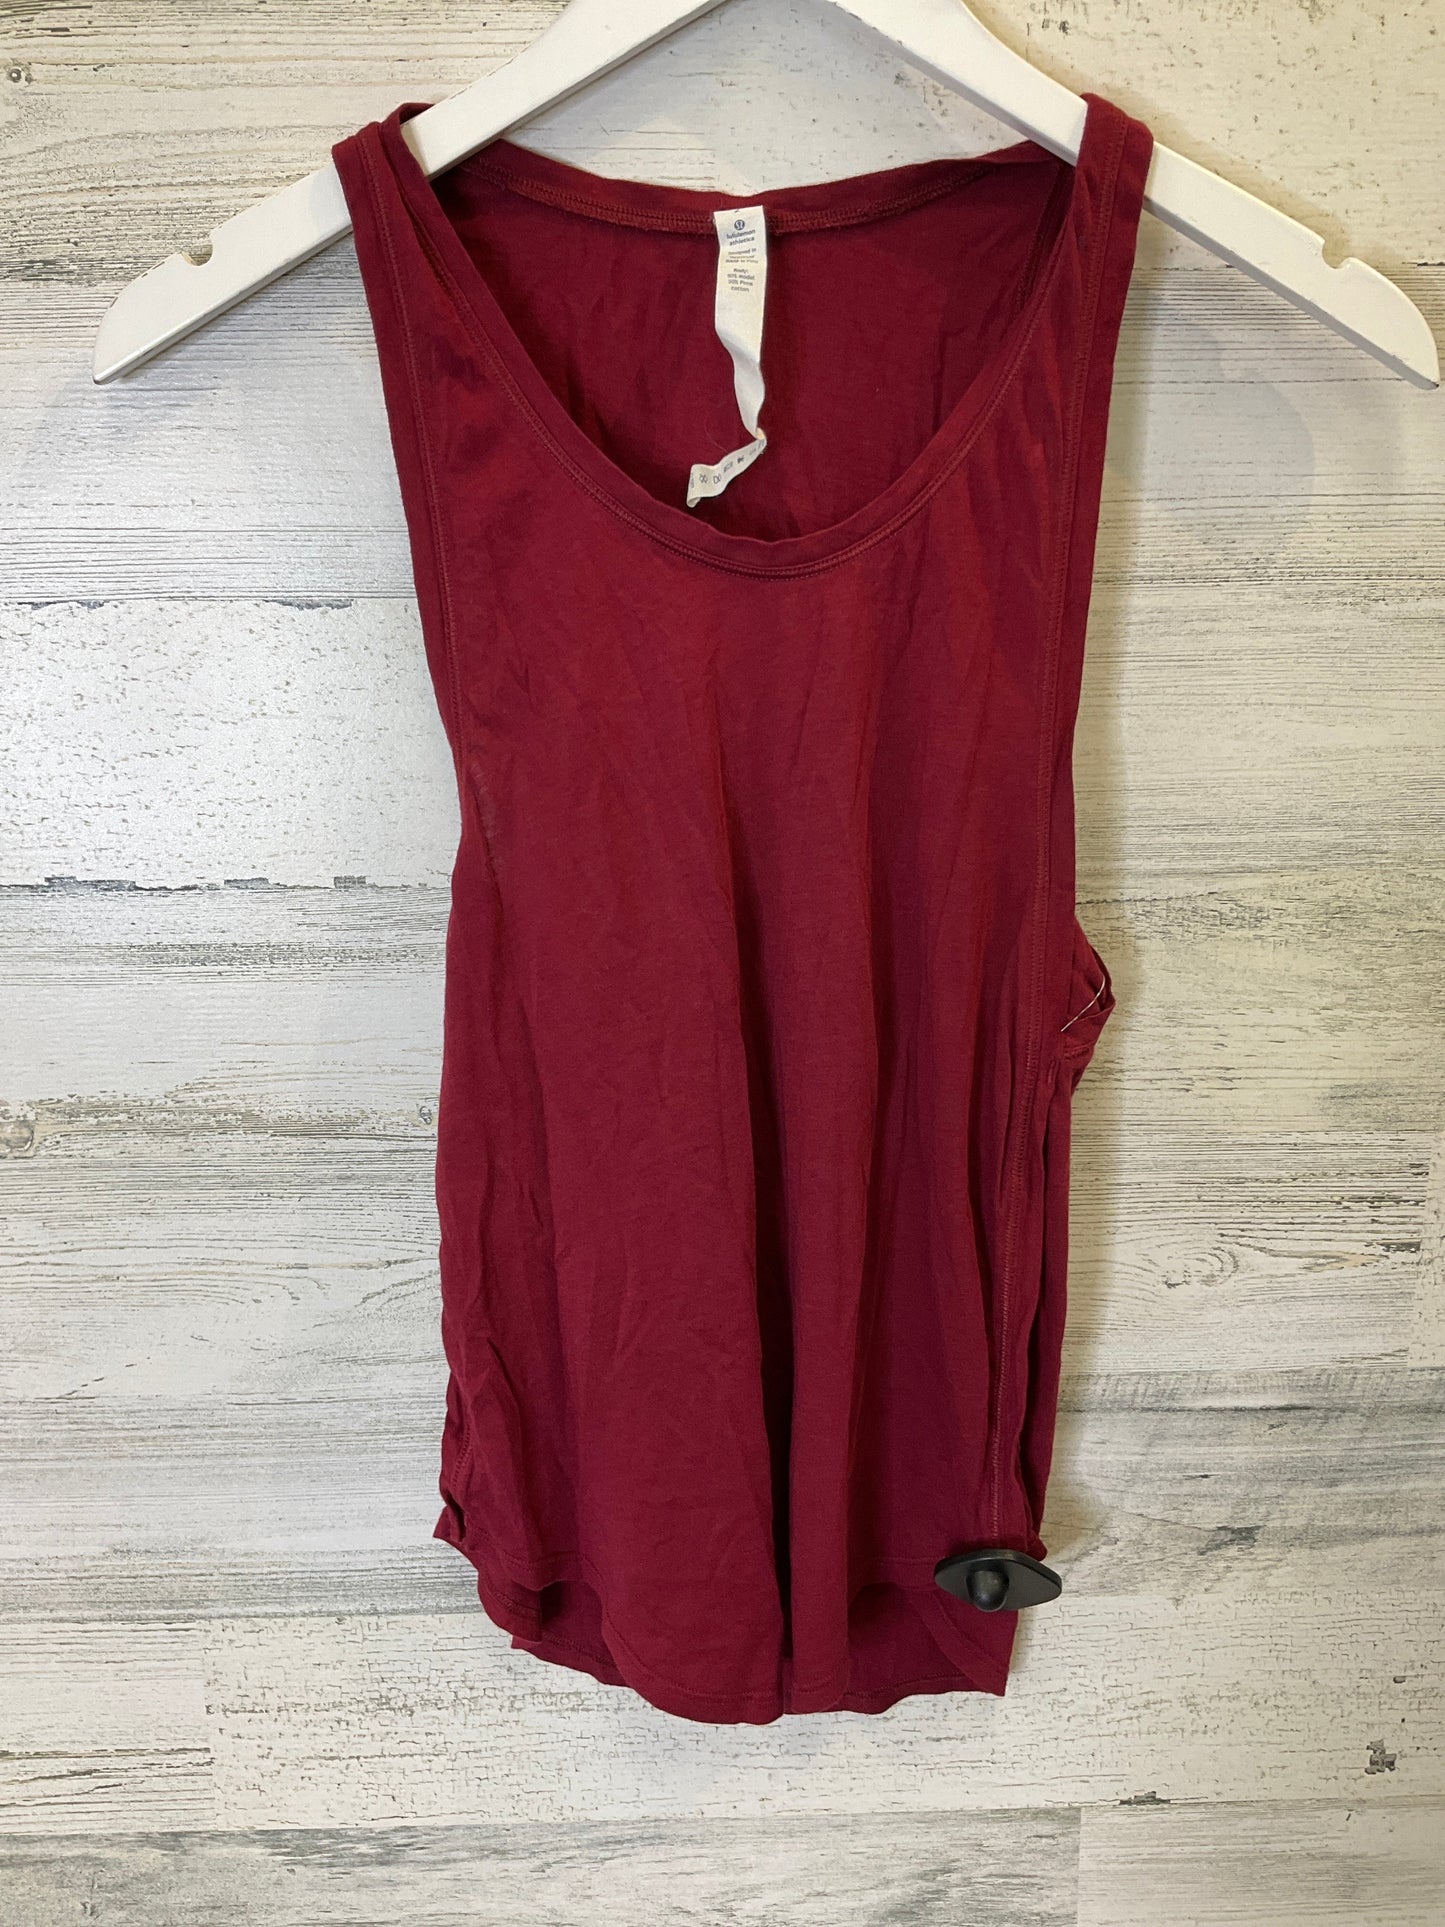 Red Athletic Tank Top Lululemon, Size 2